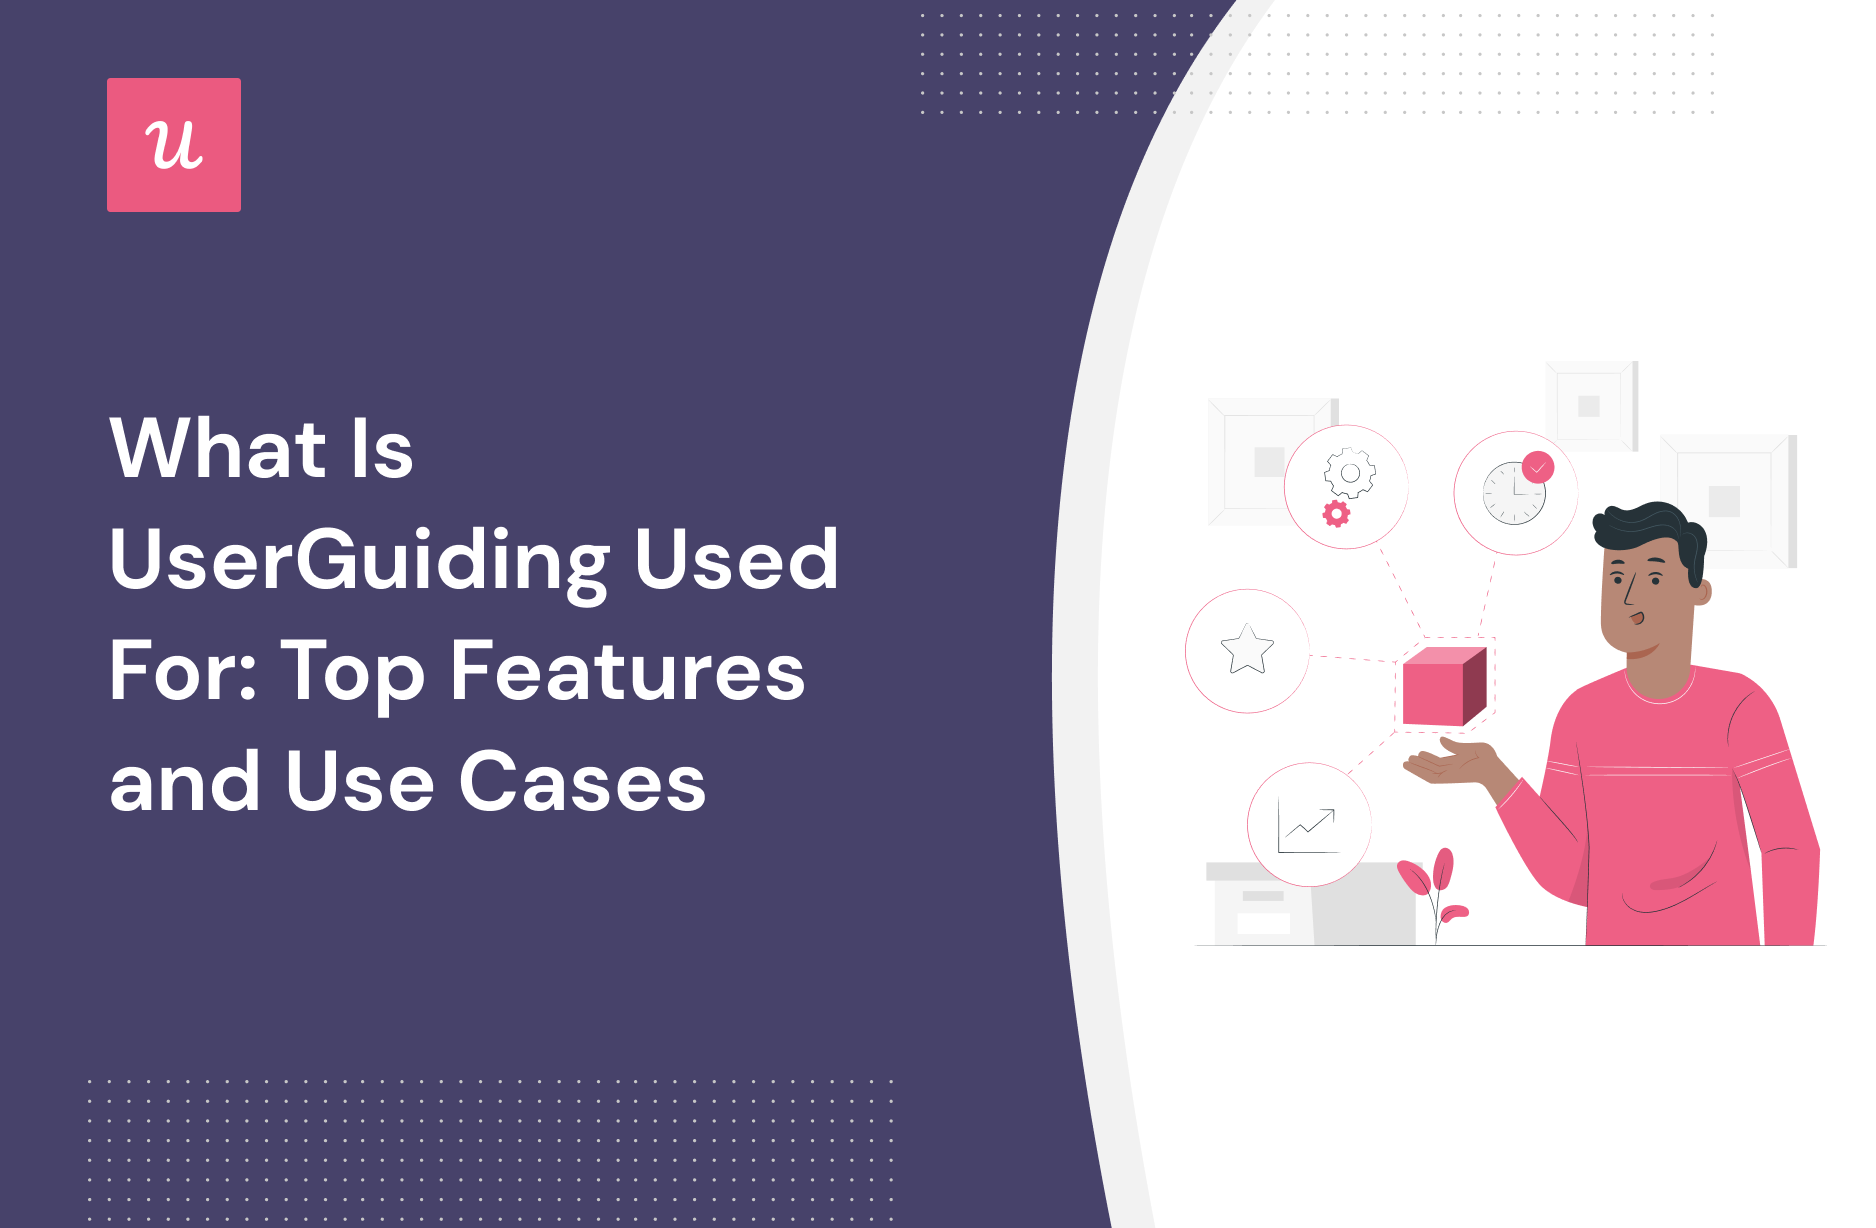 What Is UserGuiding Used For: Top Features and Use Cases